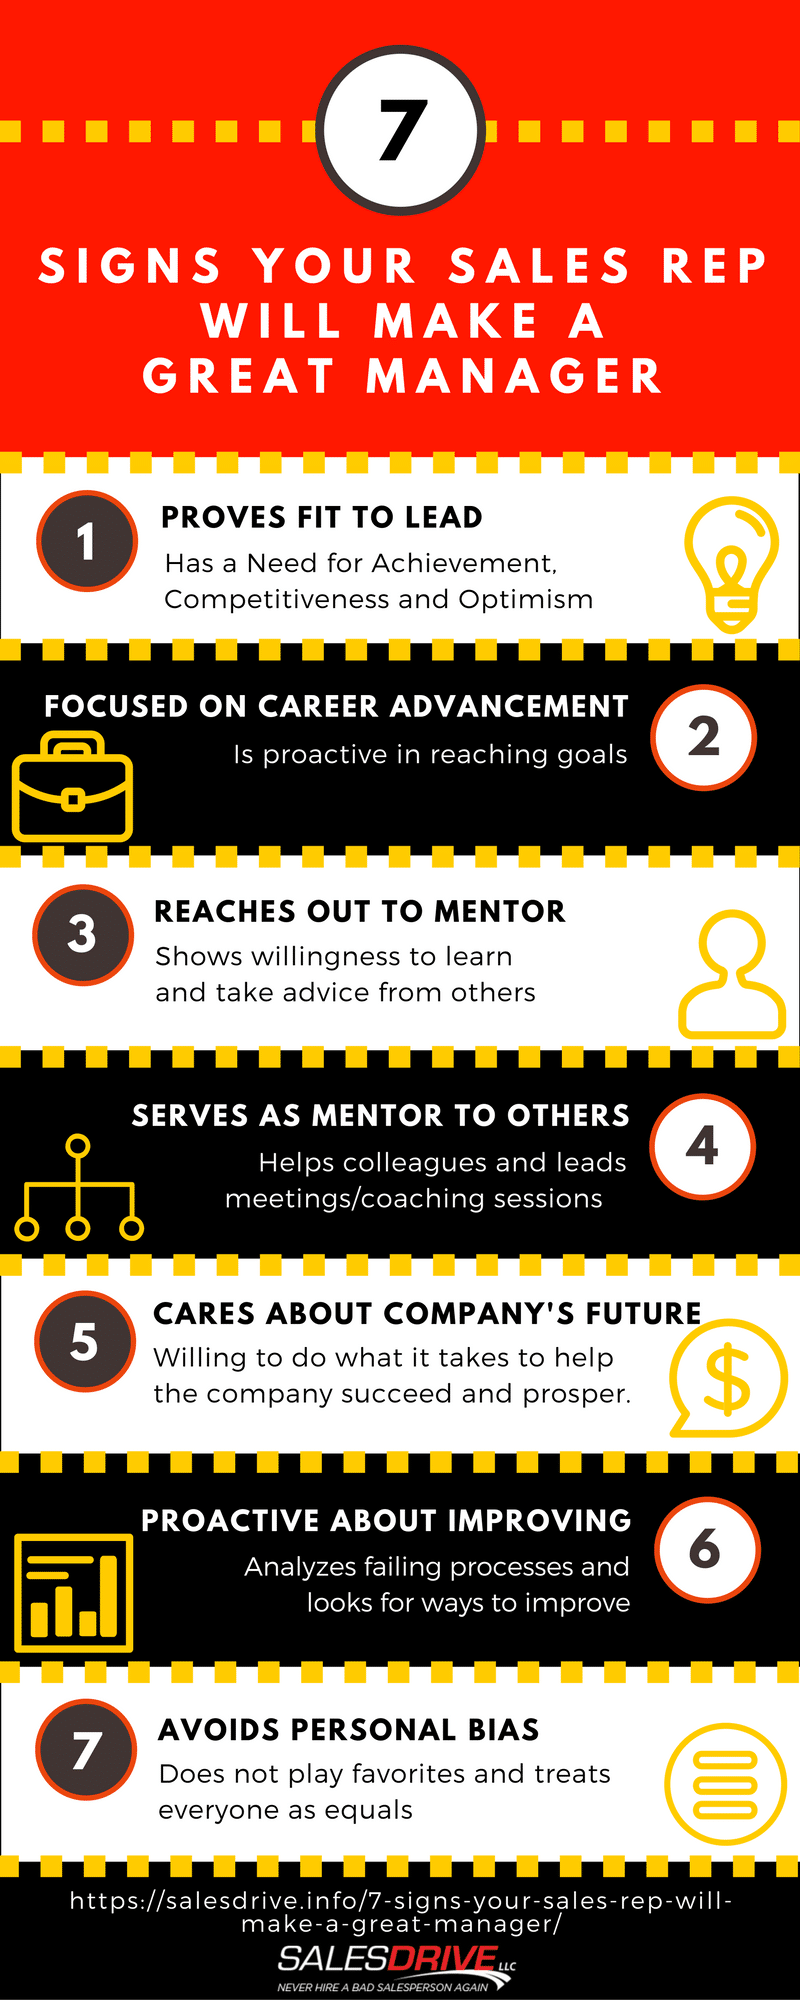 signs-sales-rep-great-manager-infographic